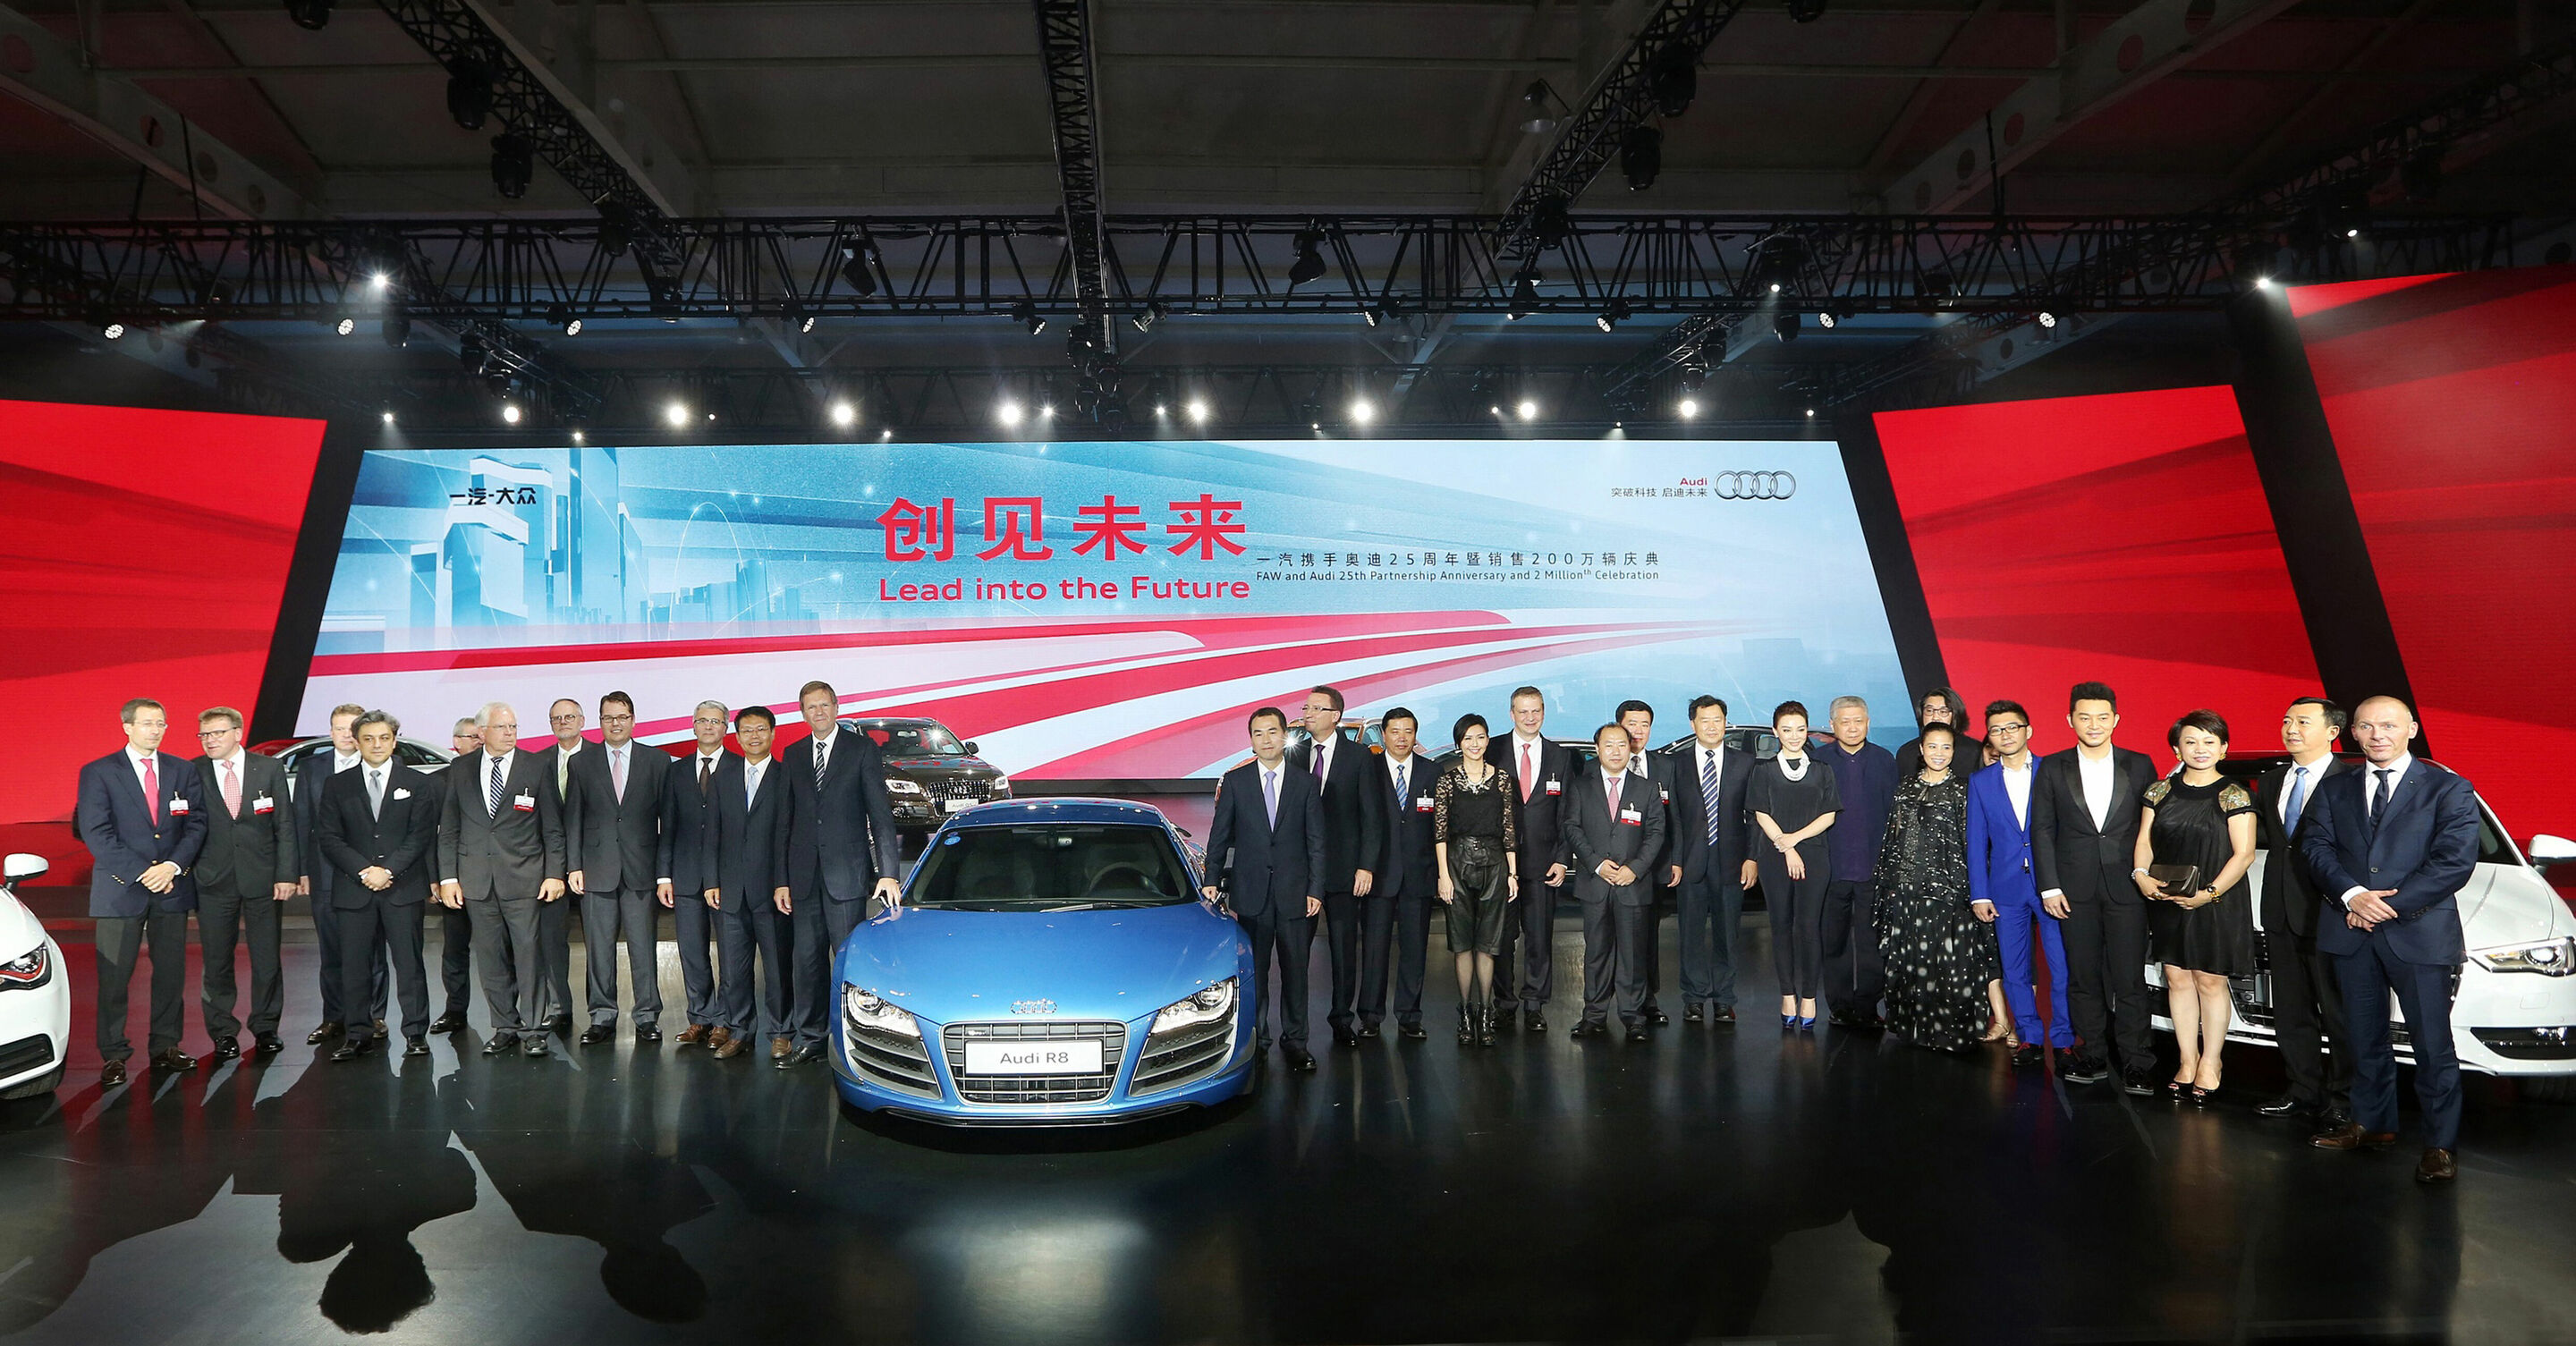 Audi celebrates the 25th jubilee of its partnership with First Automotive Works (FAW).  At the same time, Audi is today delivering to a customer its two-millionth car in China, a locally produced Audi A6 L. The two companies have announced that they will work together on a plug-in-hybrid project.